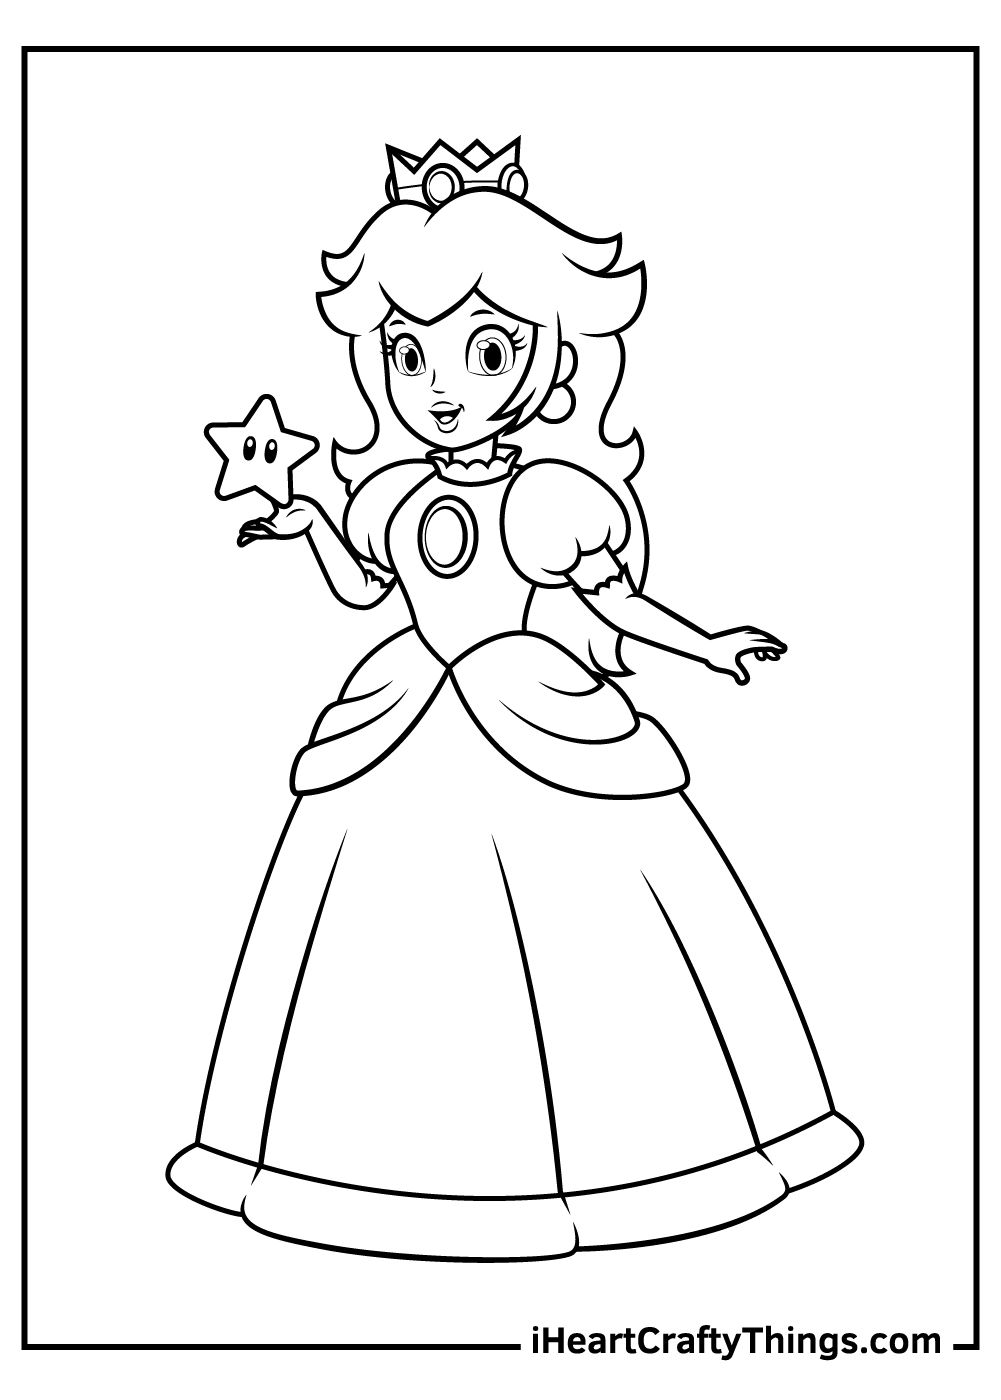 Princess peach coloring pages super mario coloring pages princess coloring pages mario coloring pages